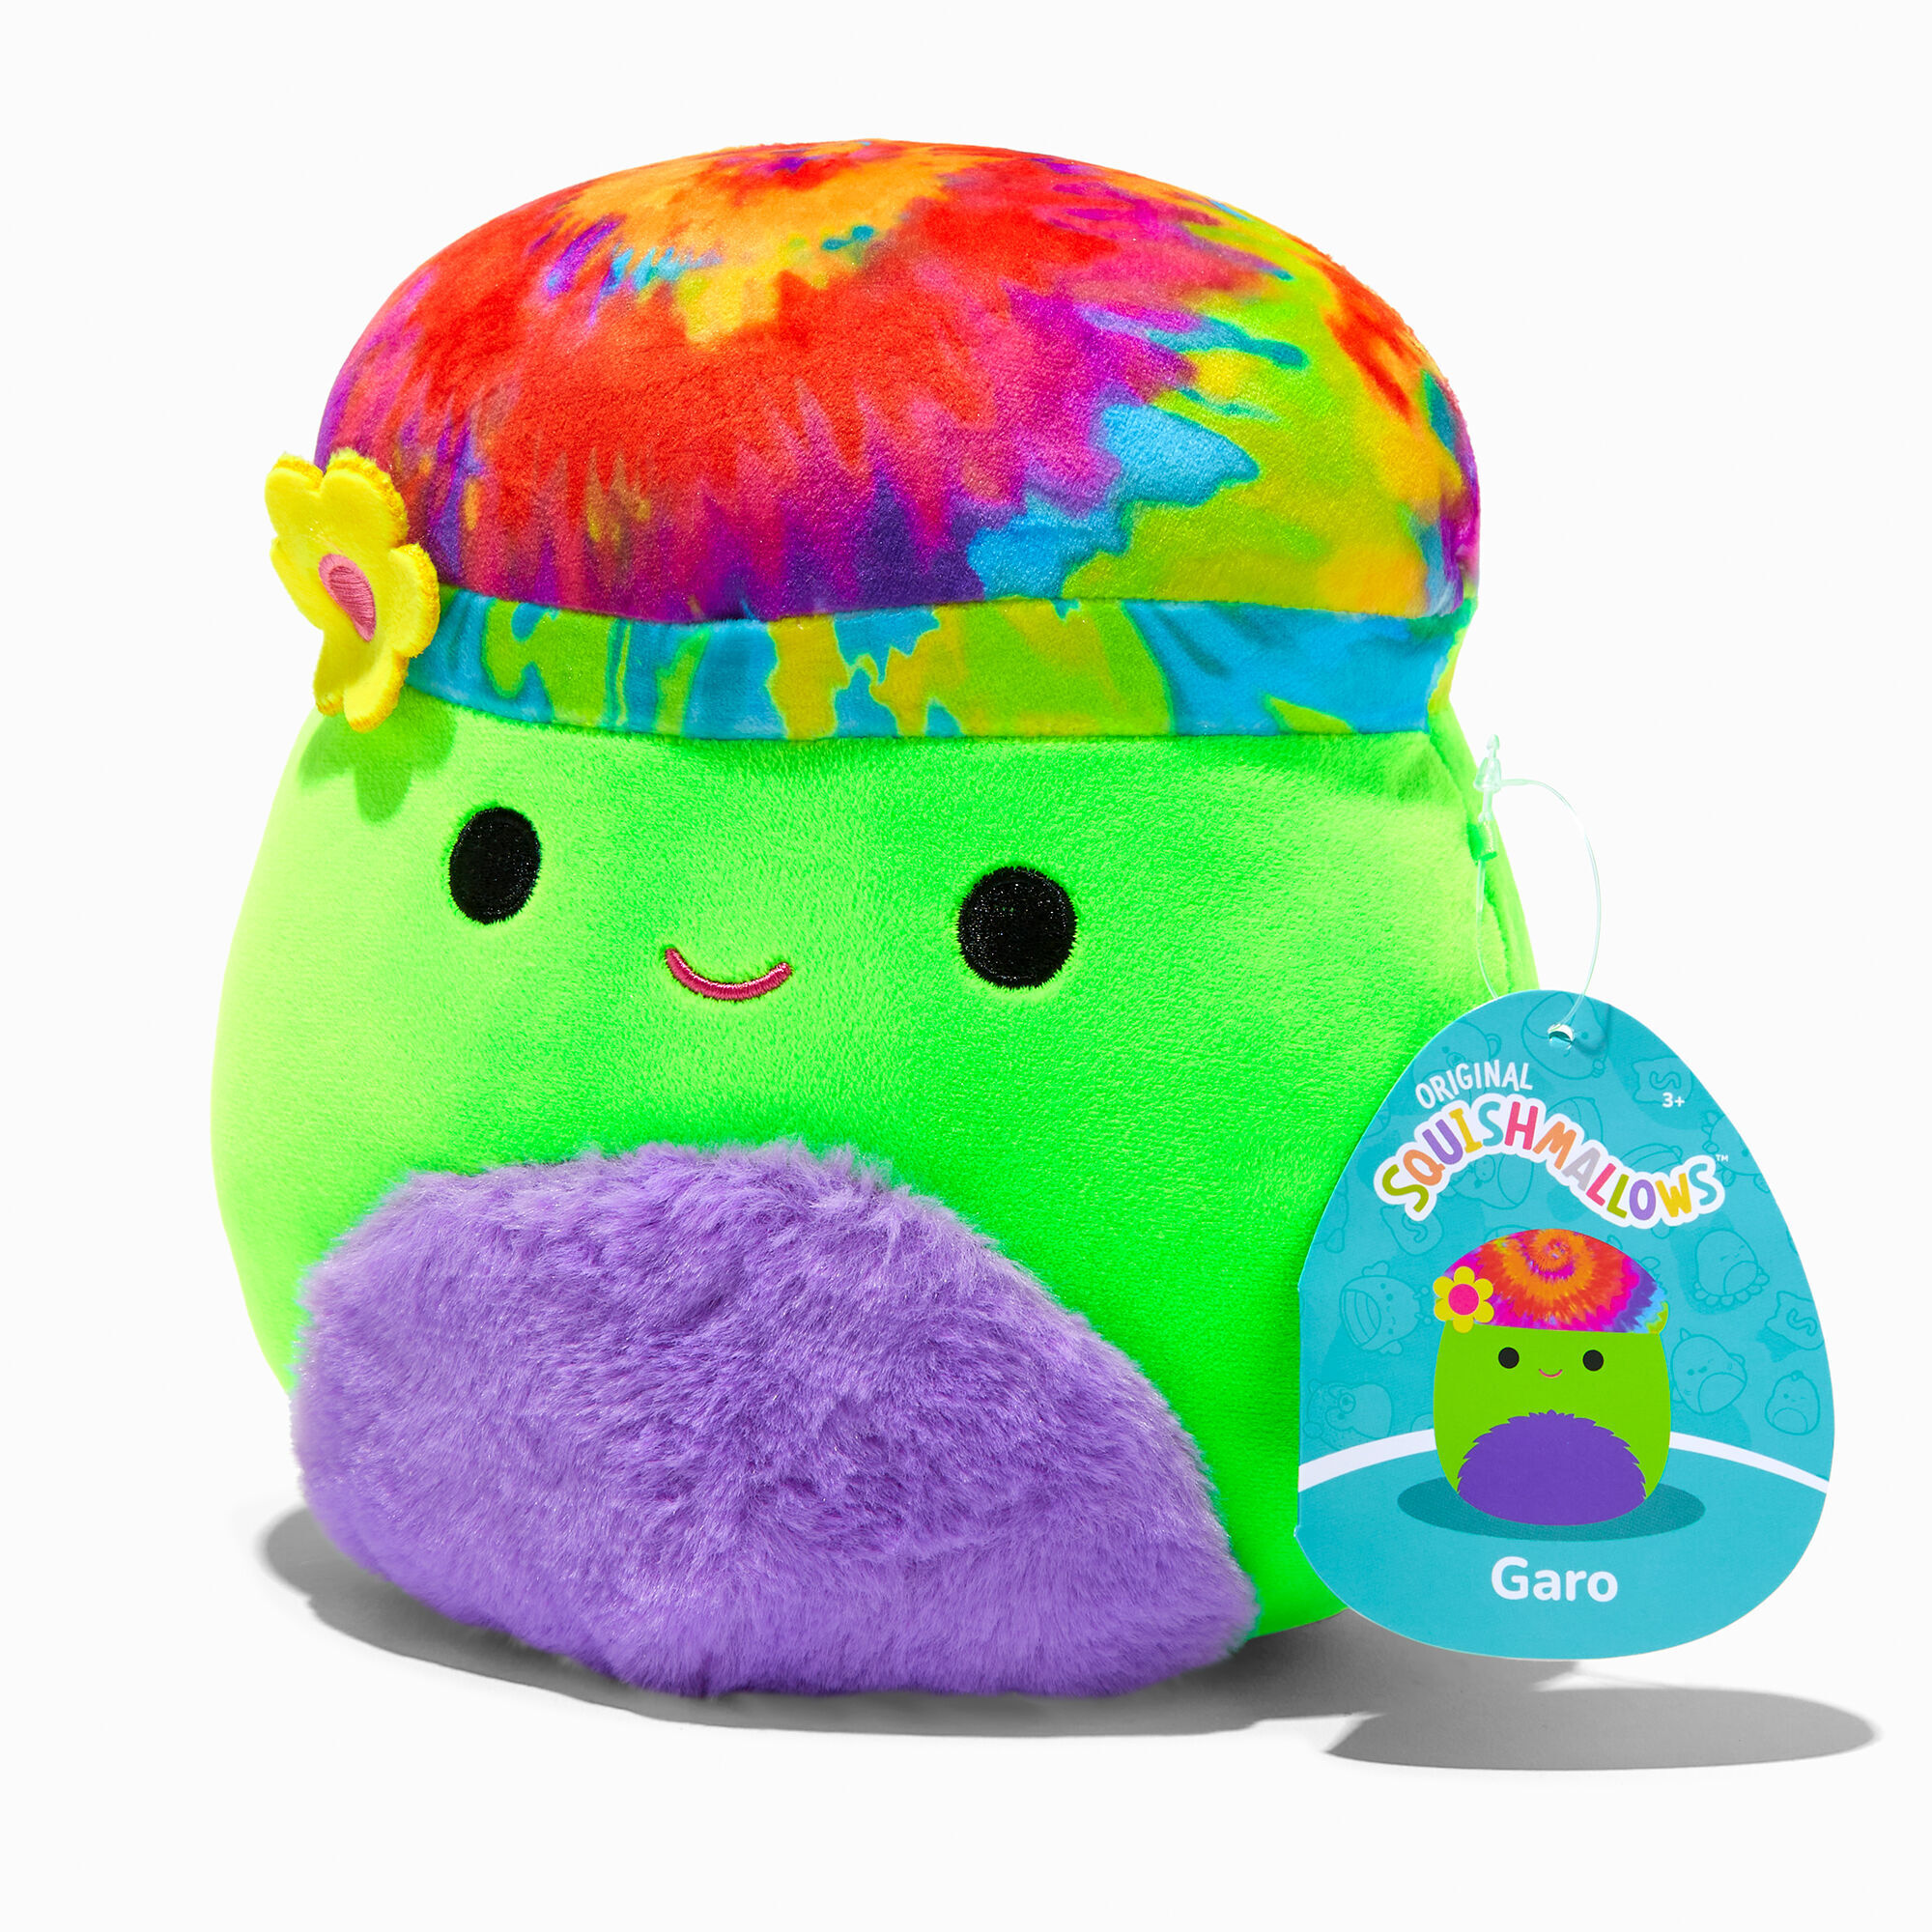 View Squishmallows Claires Exclusive 12 Blacklight Garo Soft Toy information